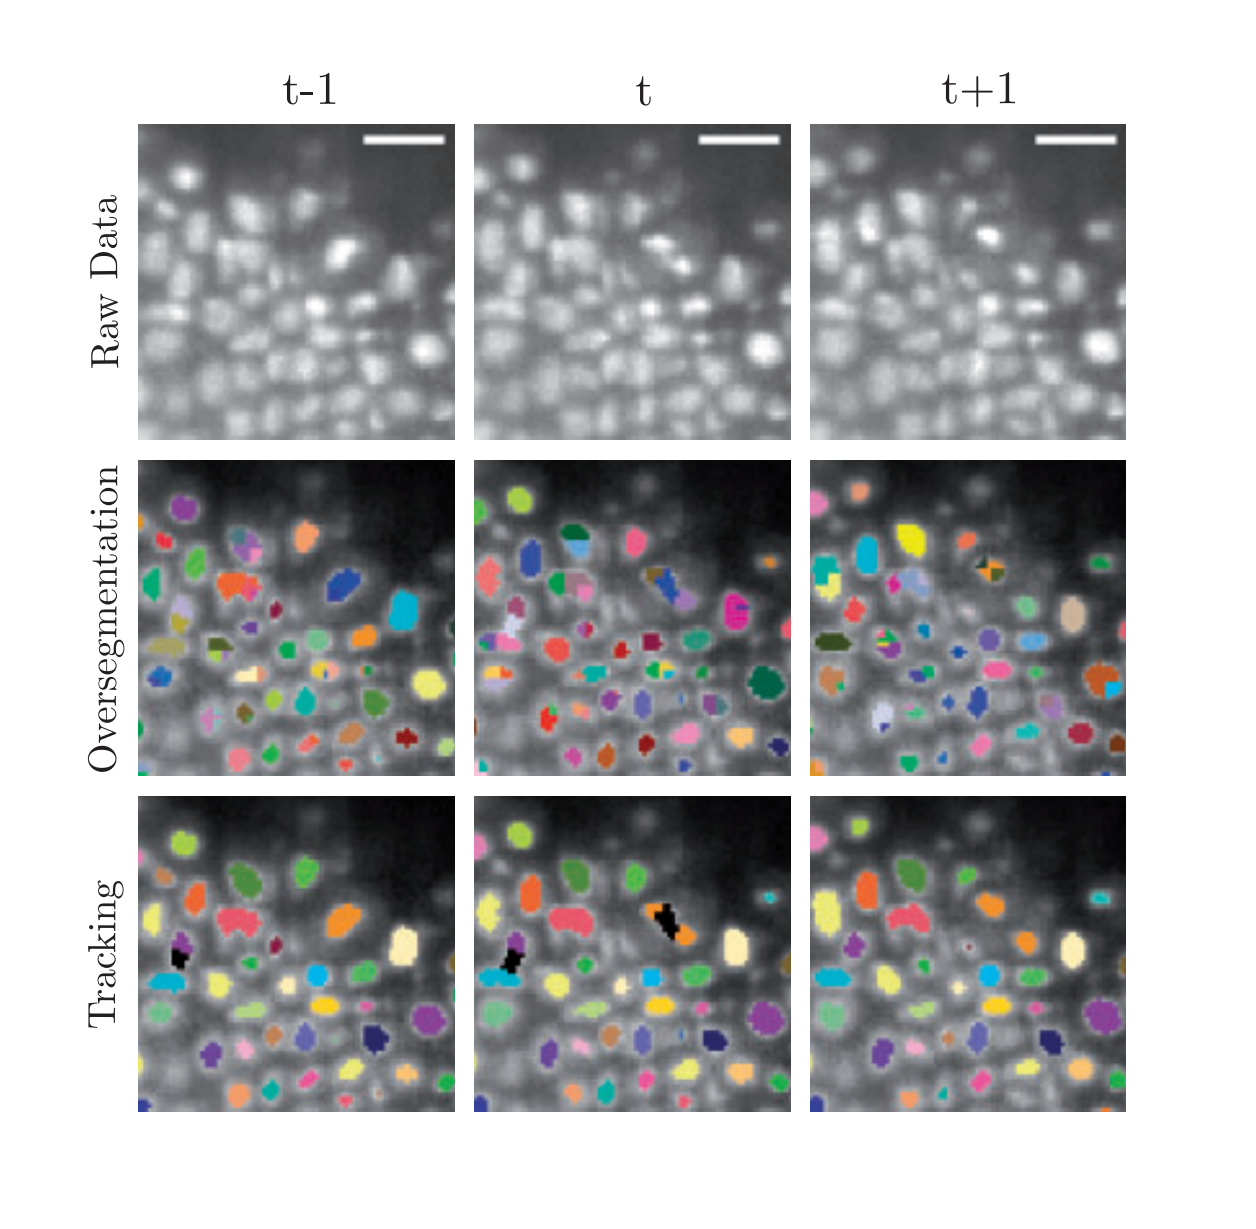 Graphical model for joint segmentation and tracking of multiple dividing cells